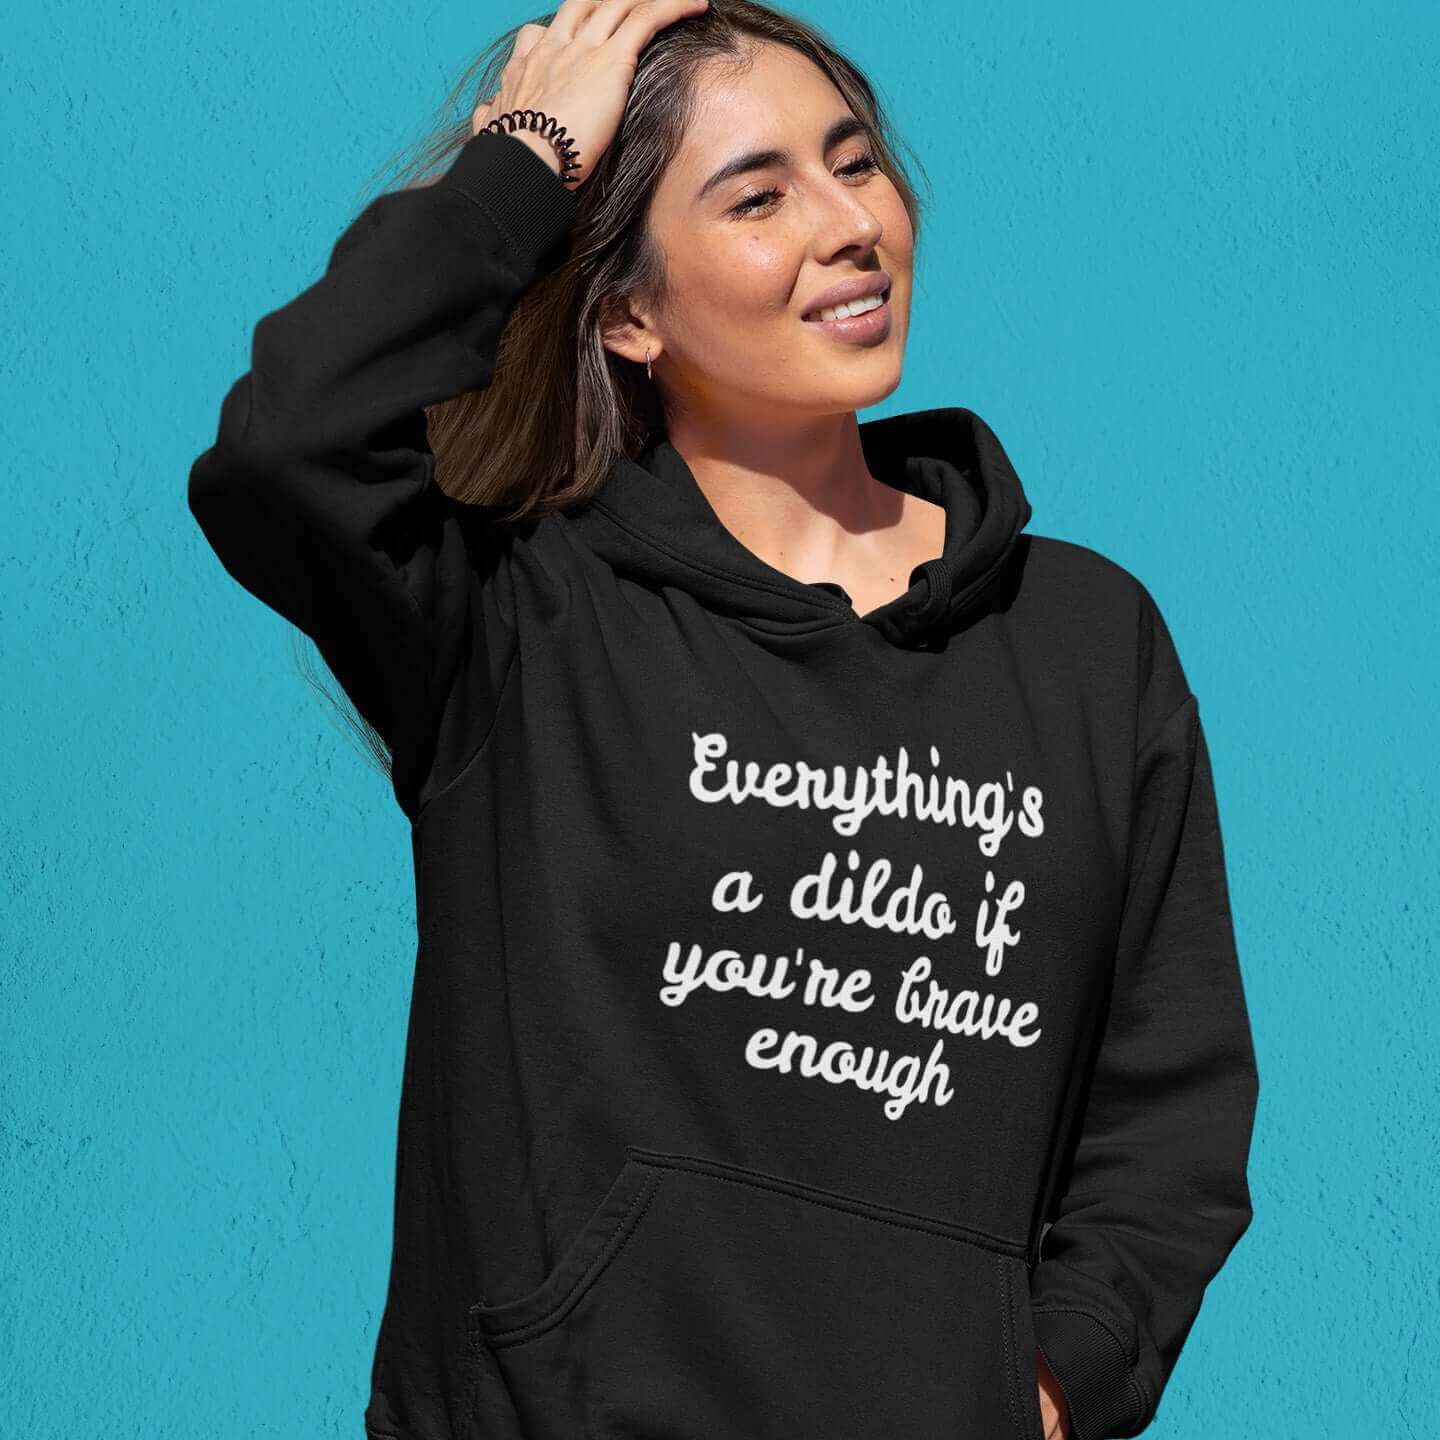 Woman wearing black hooded sweatshirt with the words Everything's a dildo if you're brave enough printed on the front.